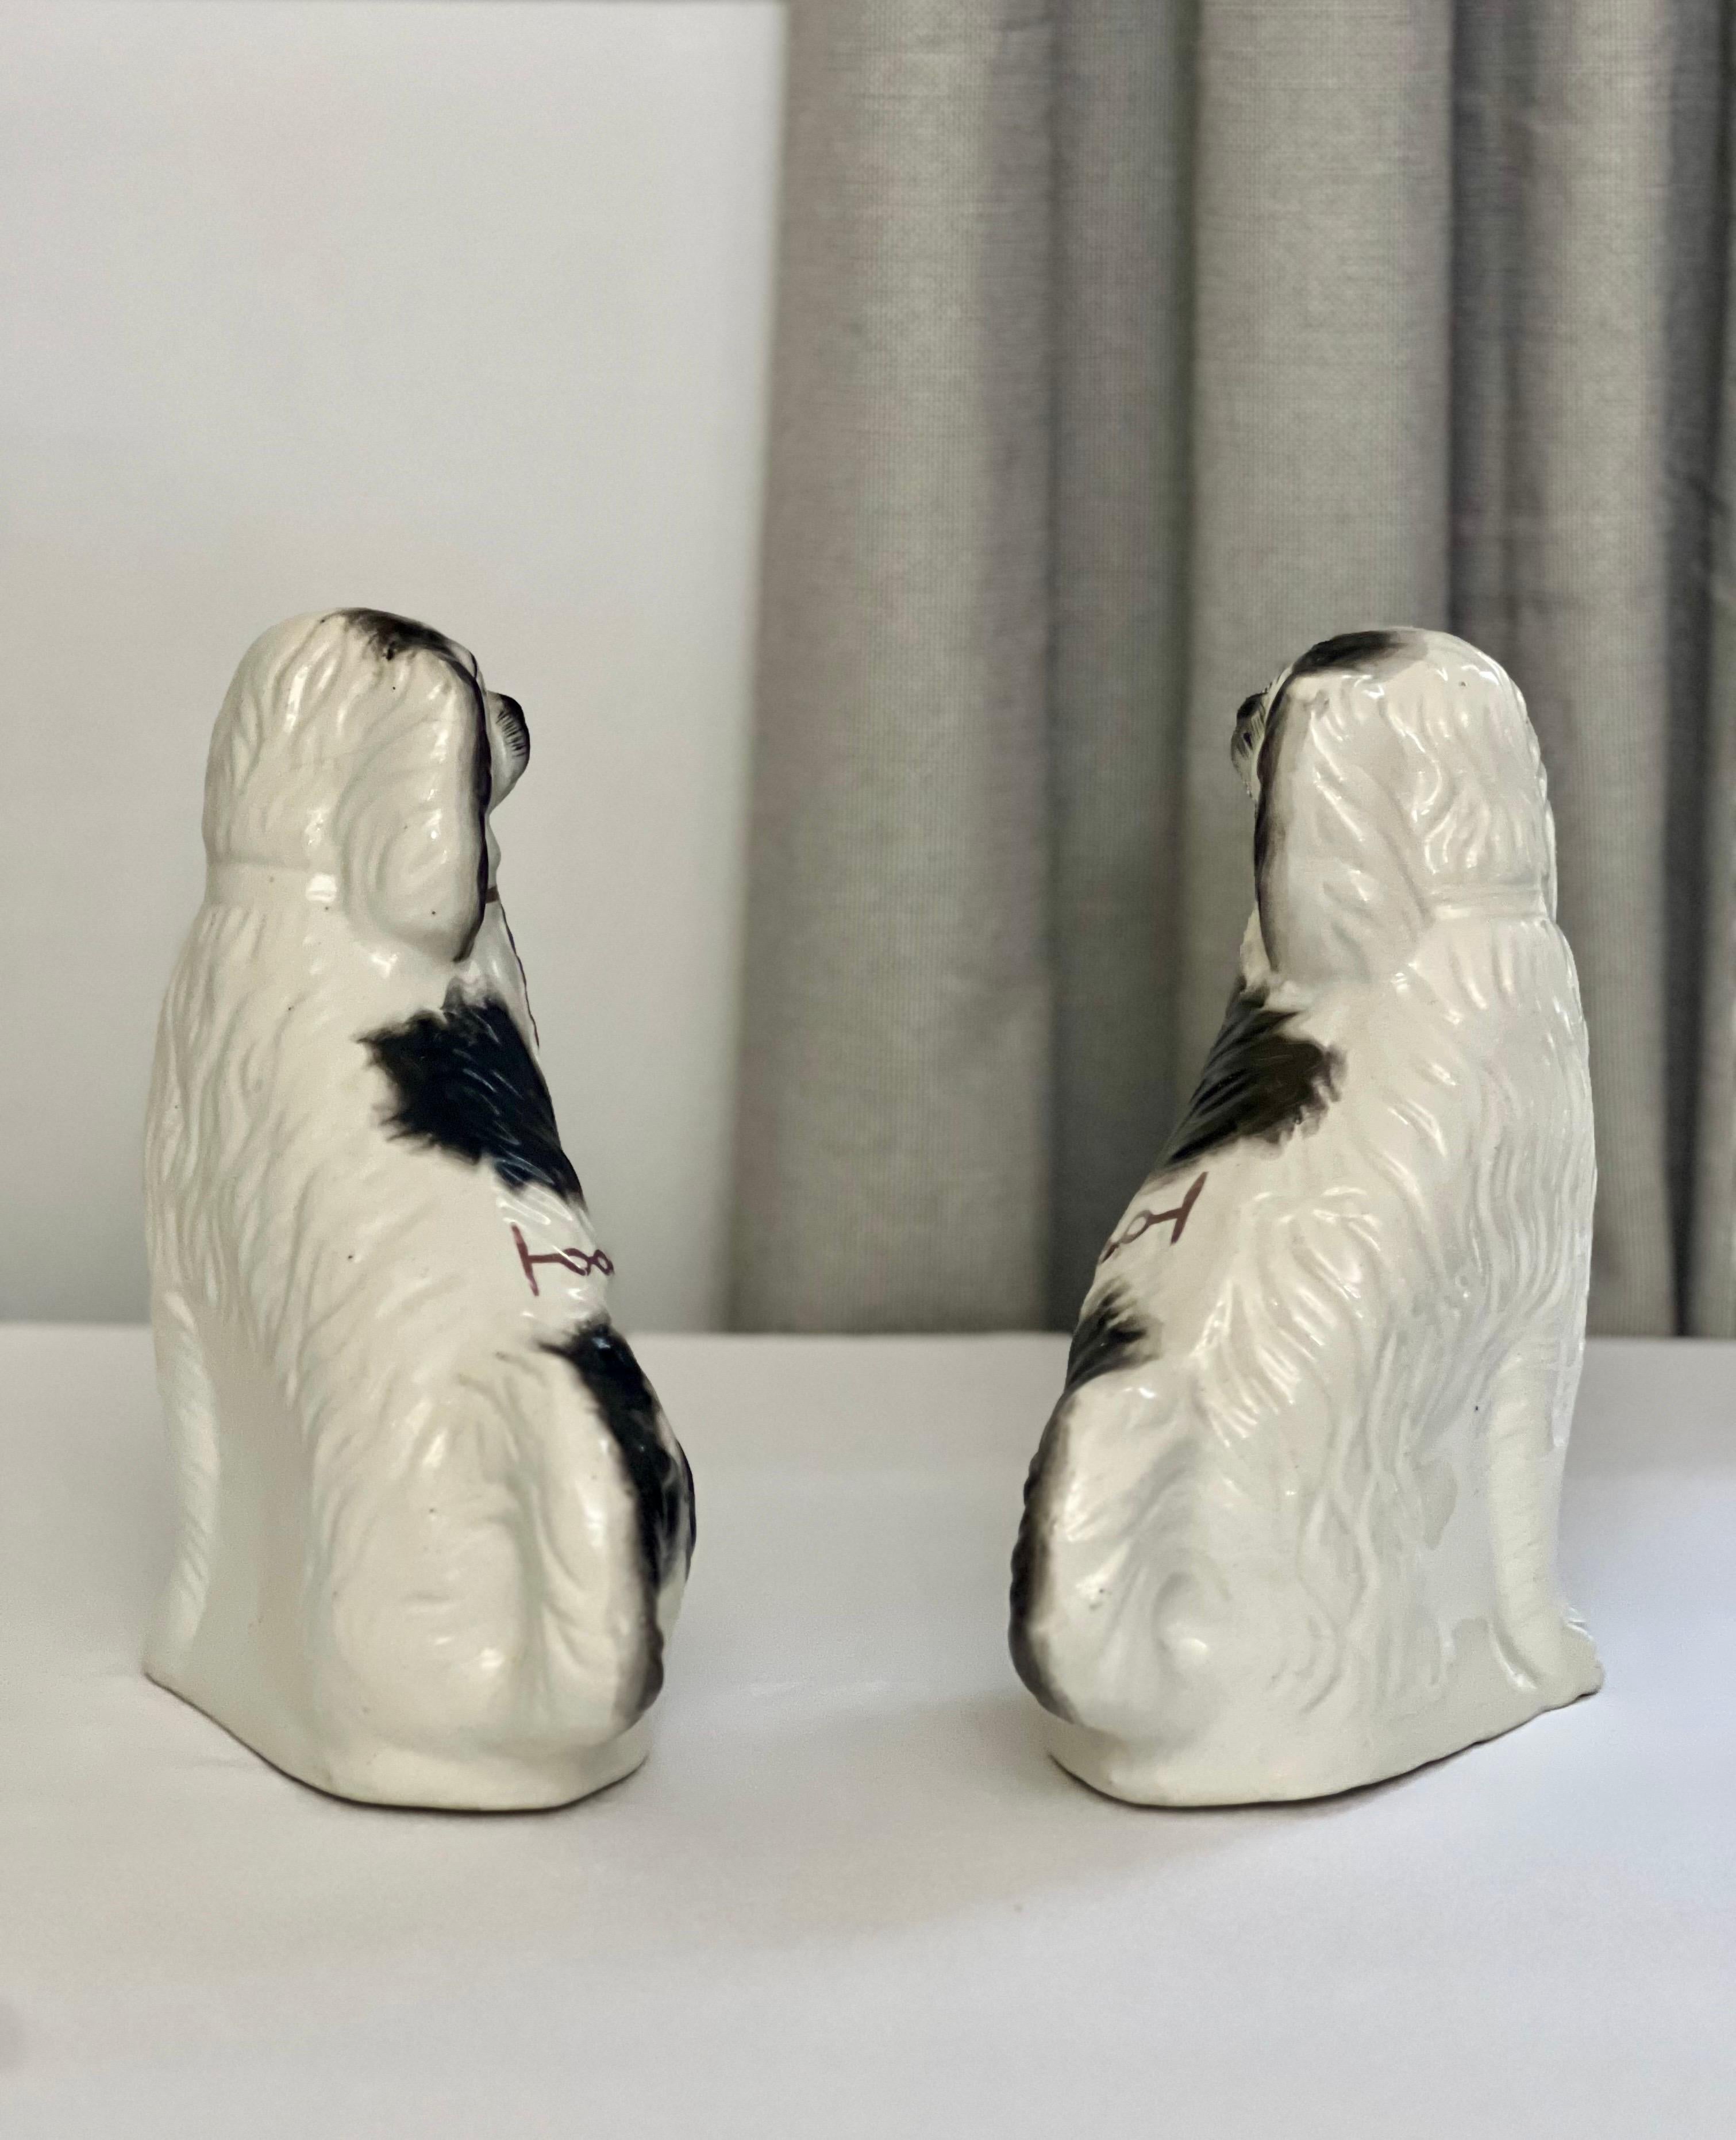 Fired Early 20th Century English Staffordshire Spaniel Dog Figurines, Pair For Sale